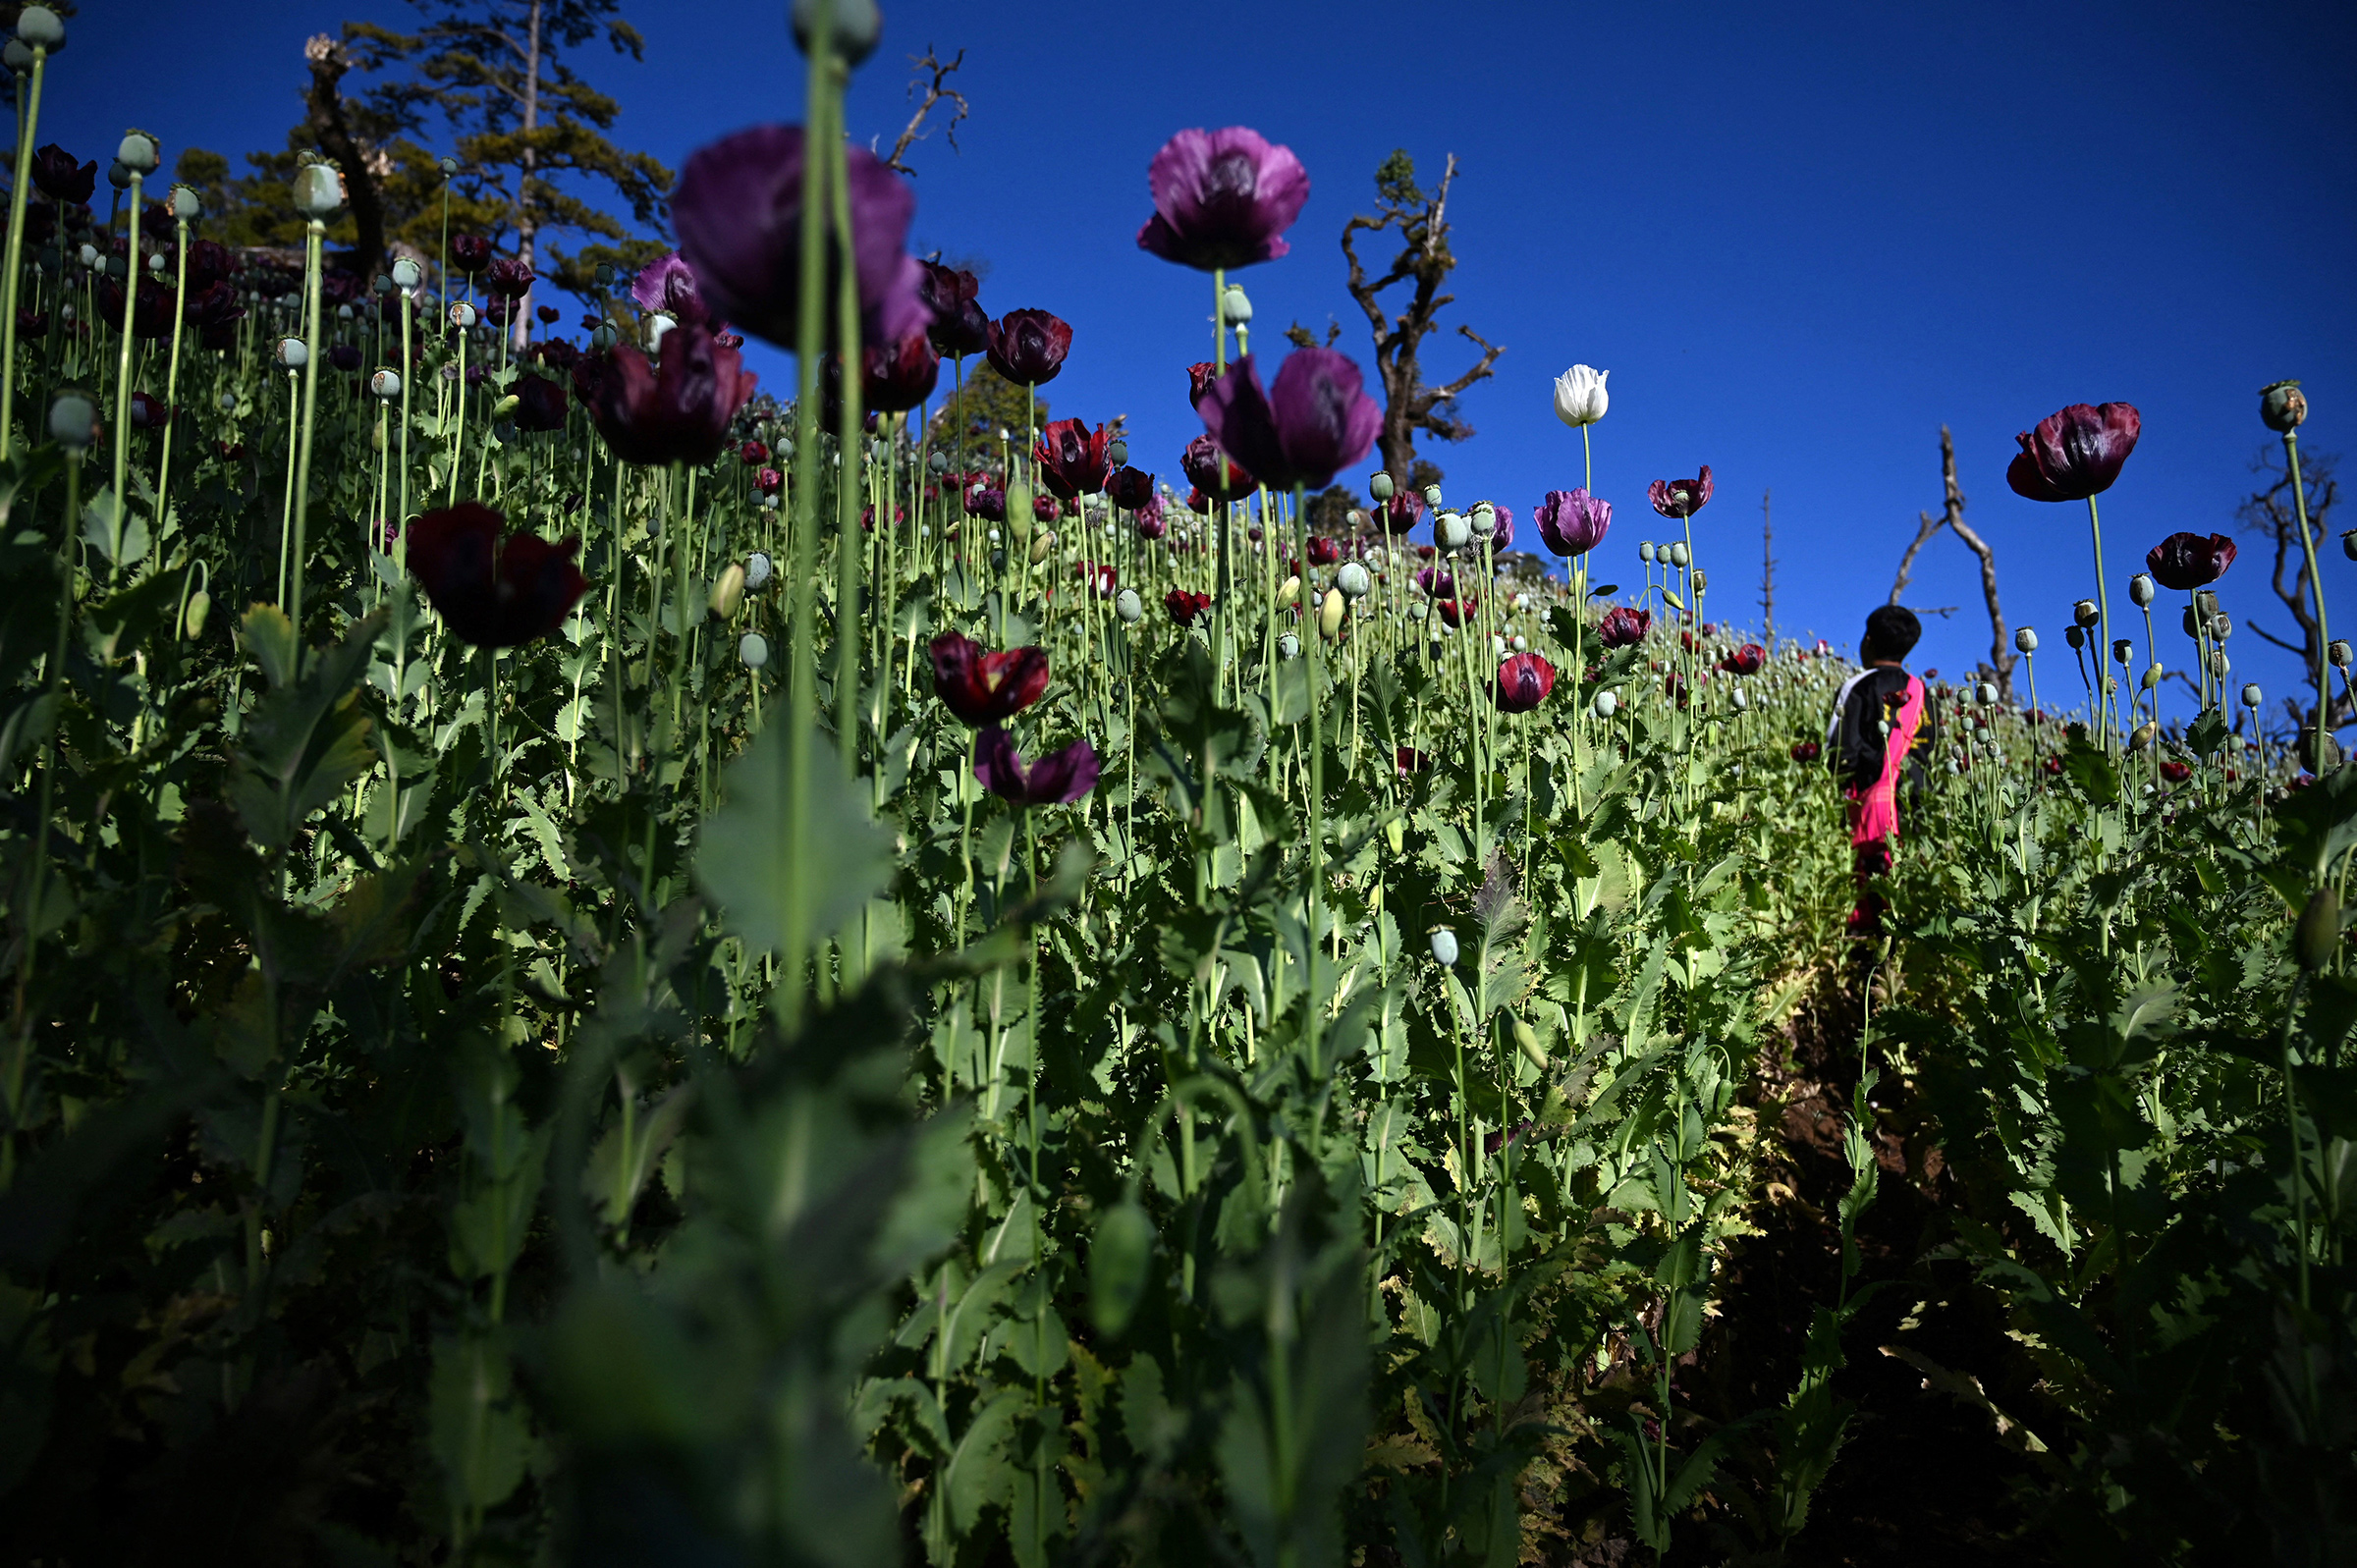 A farmer working at an illegal poppy field in Hopong, Myanmar Shan State. Myanmar is now the world's biggest producer of opium, overtaking Afghanistan after the Taliban crackdown on the trade, according to a United Nations report released on Dec. 12, 2023.